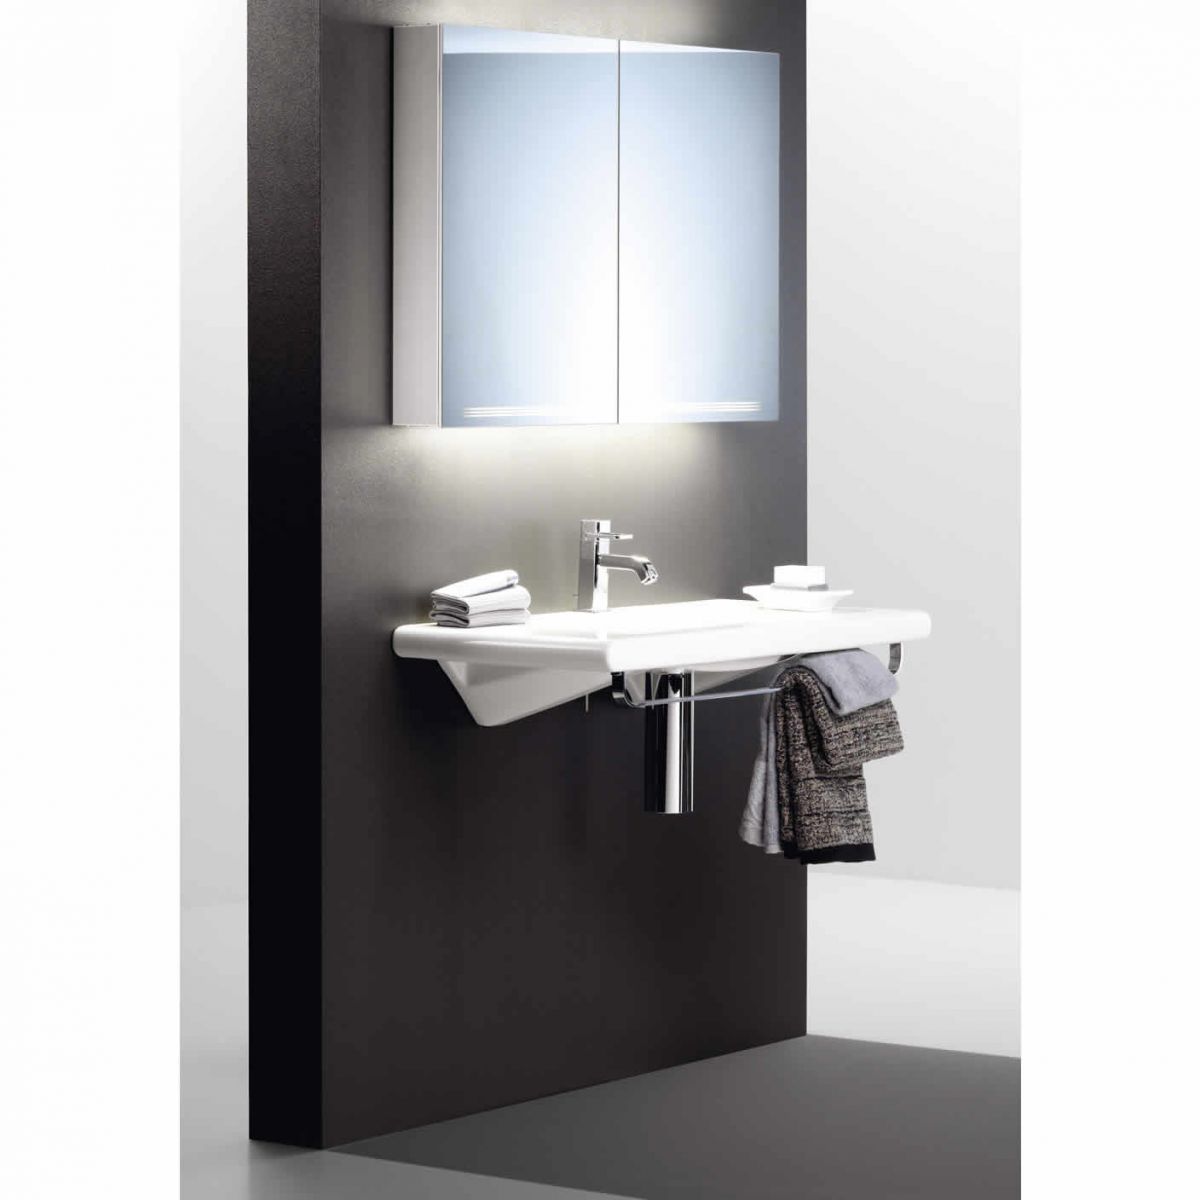 picture of a mirrored bathroom cabinet